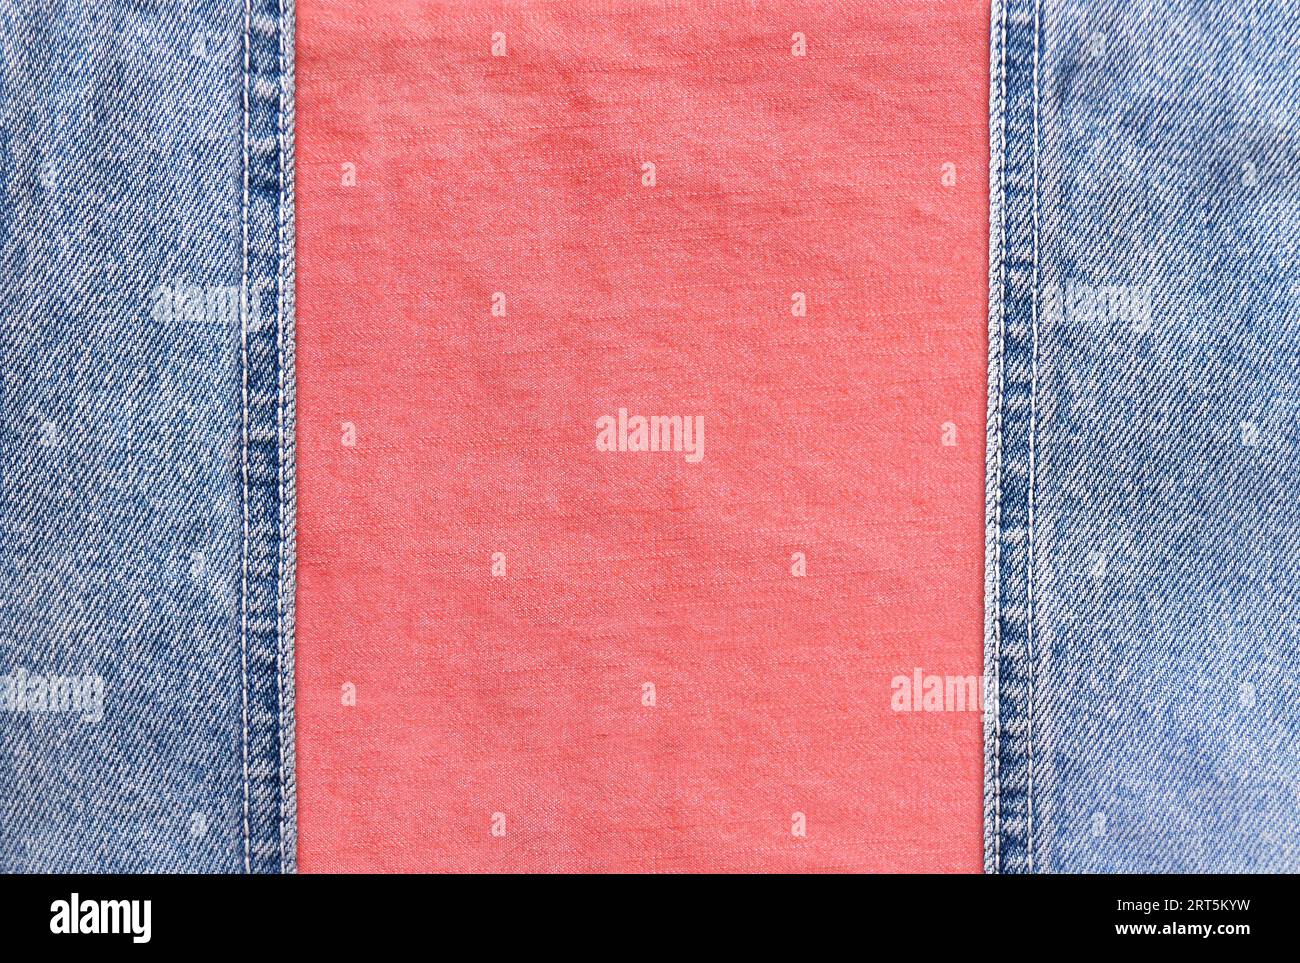 Blue denim borders with a seam and coral cotton texture. Light blue and pink color denim jeans fabric. Copy space for text Stock Photo